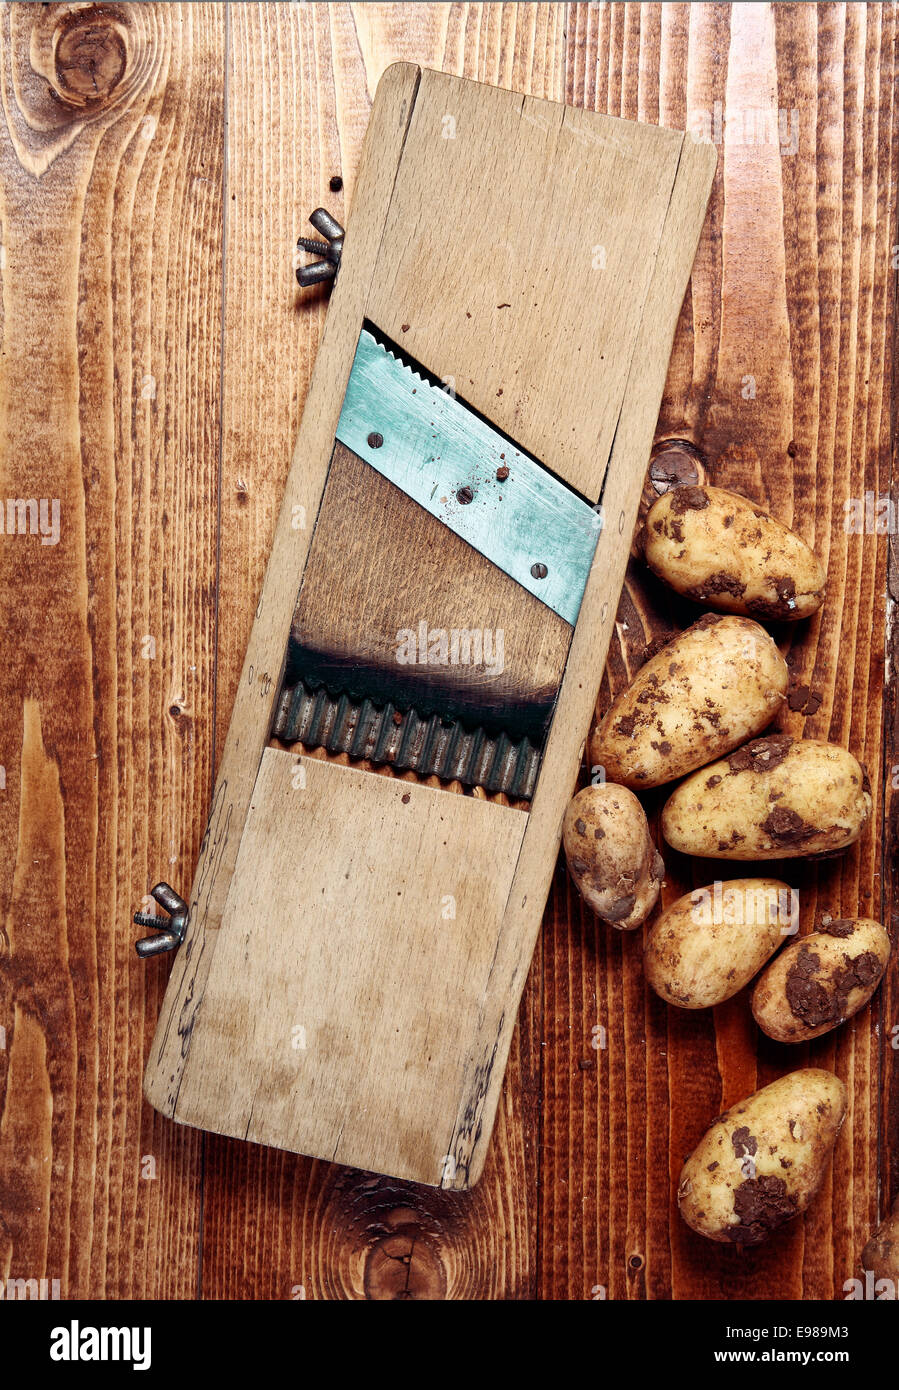 Old vintage wooden chip maker with an adjustable blade alongside fresh farm potatoes, overhead view on a wooden kitchen table Stock Photo